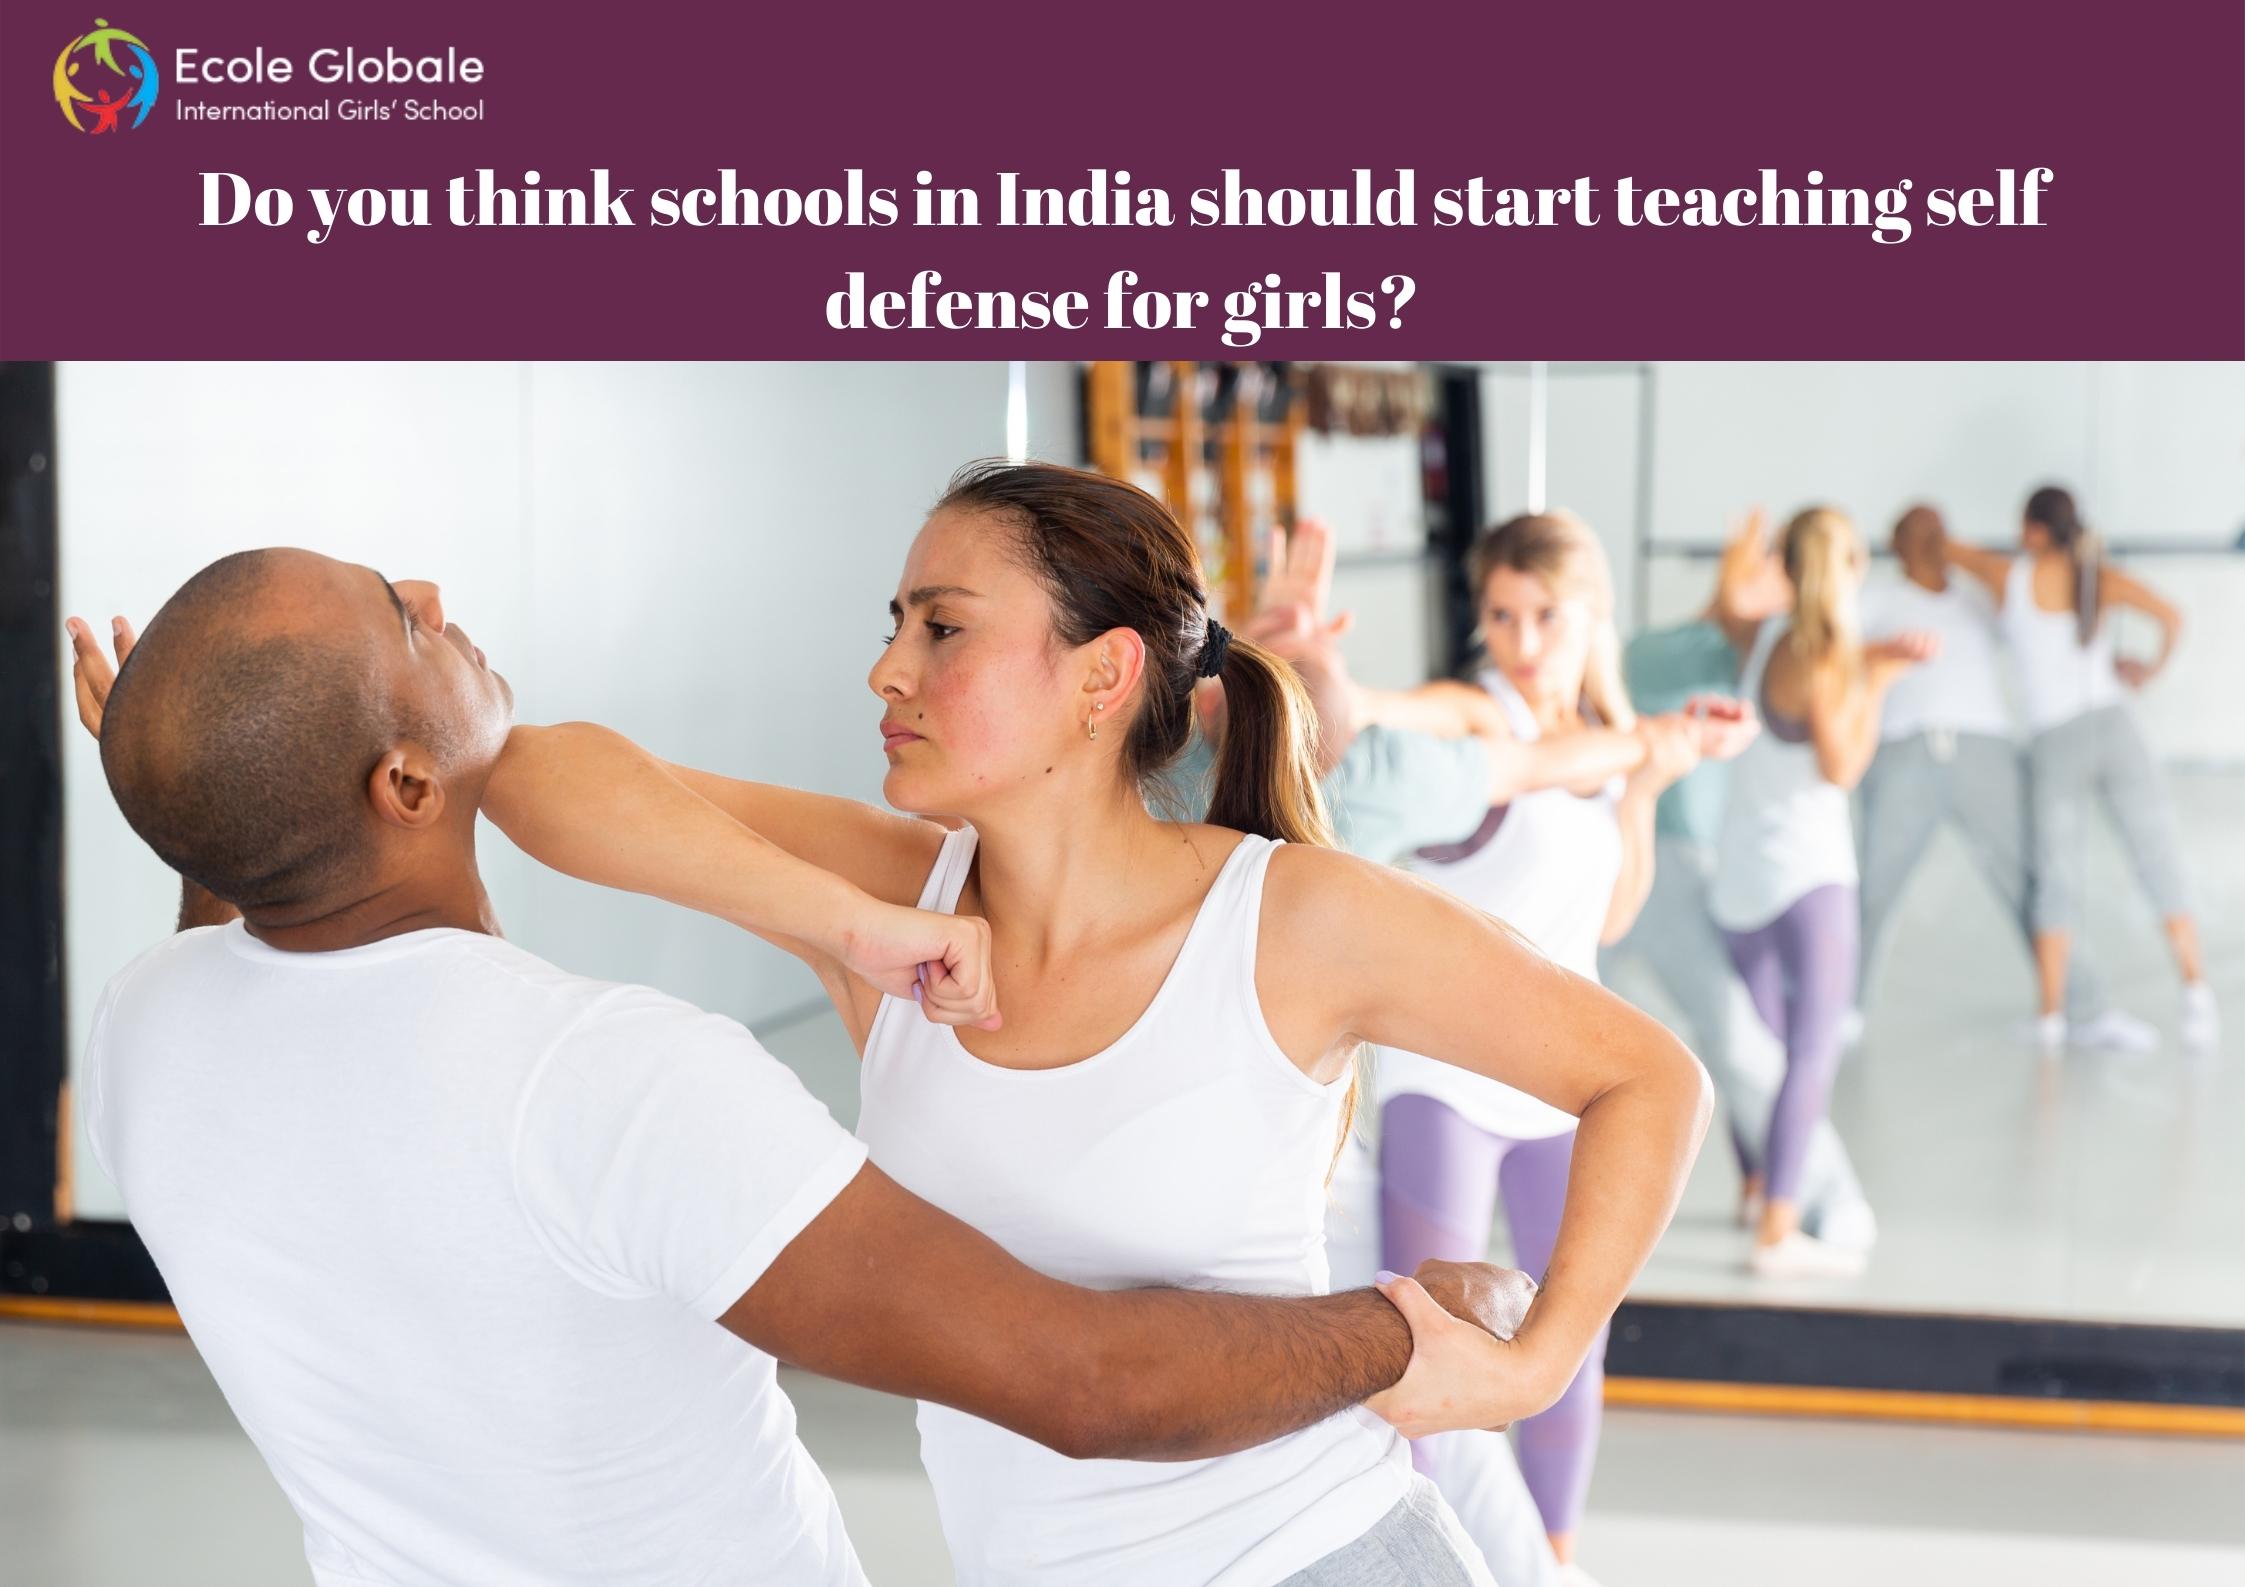 Do you think schools in India should start teaching self-defense for girls